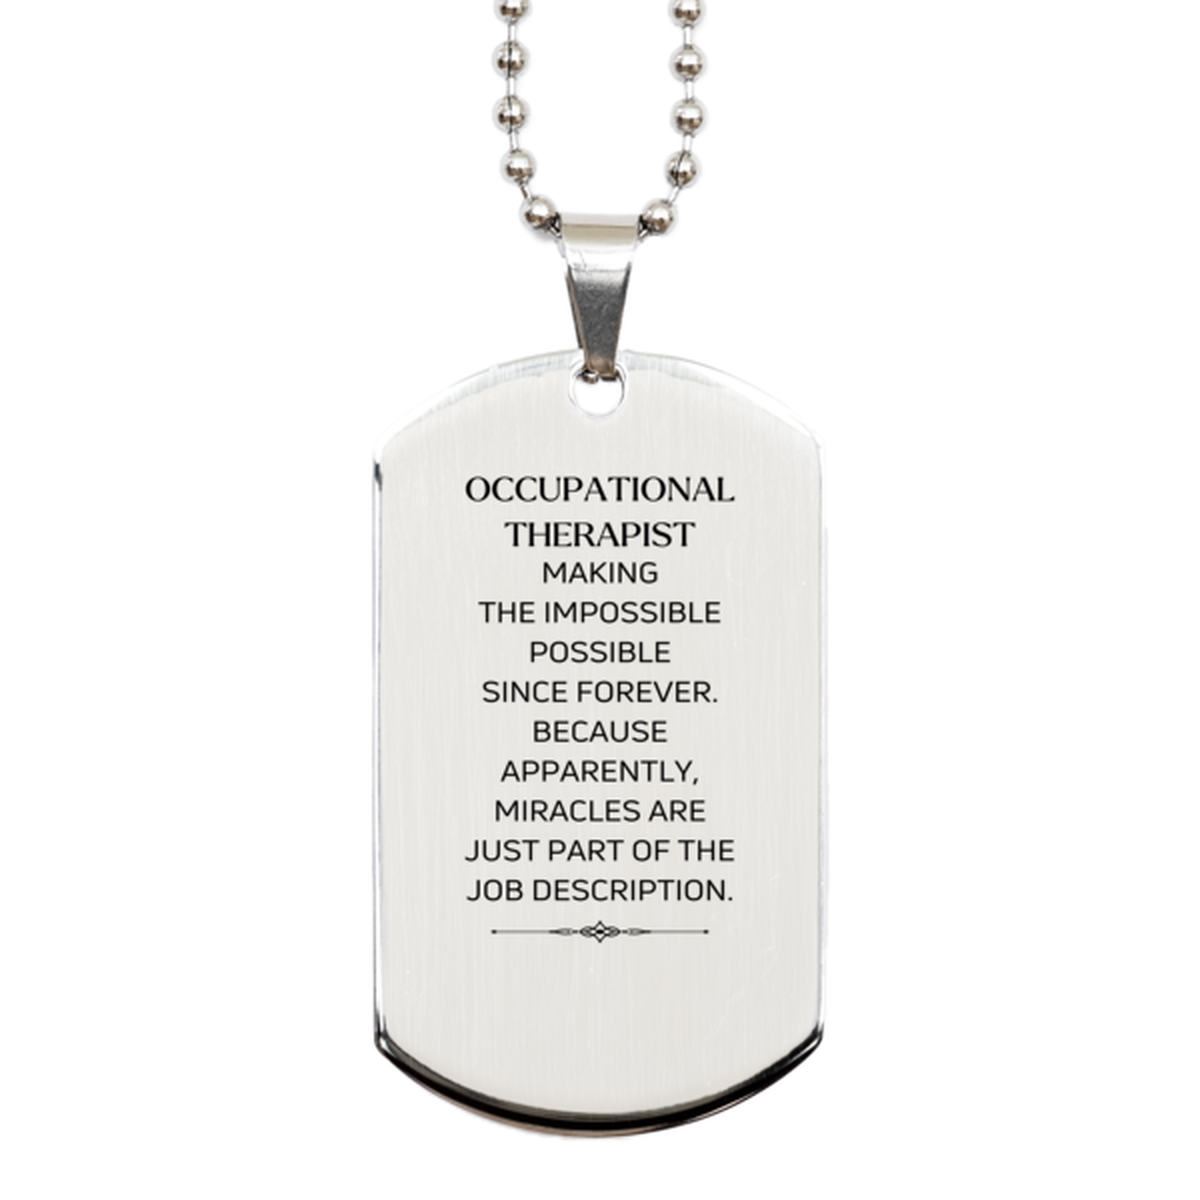 Funny Occupational Therapist Gifts, Miracles are just part of the job description, Inspirational Birthday Silver Dog Tag For Occupational Therapist, Men, Women, Coworkers, Friends, Boss